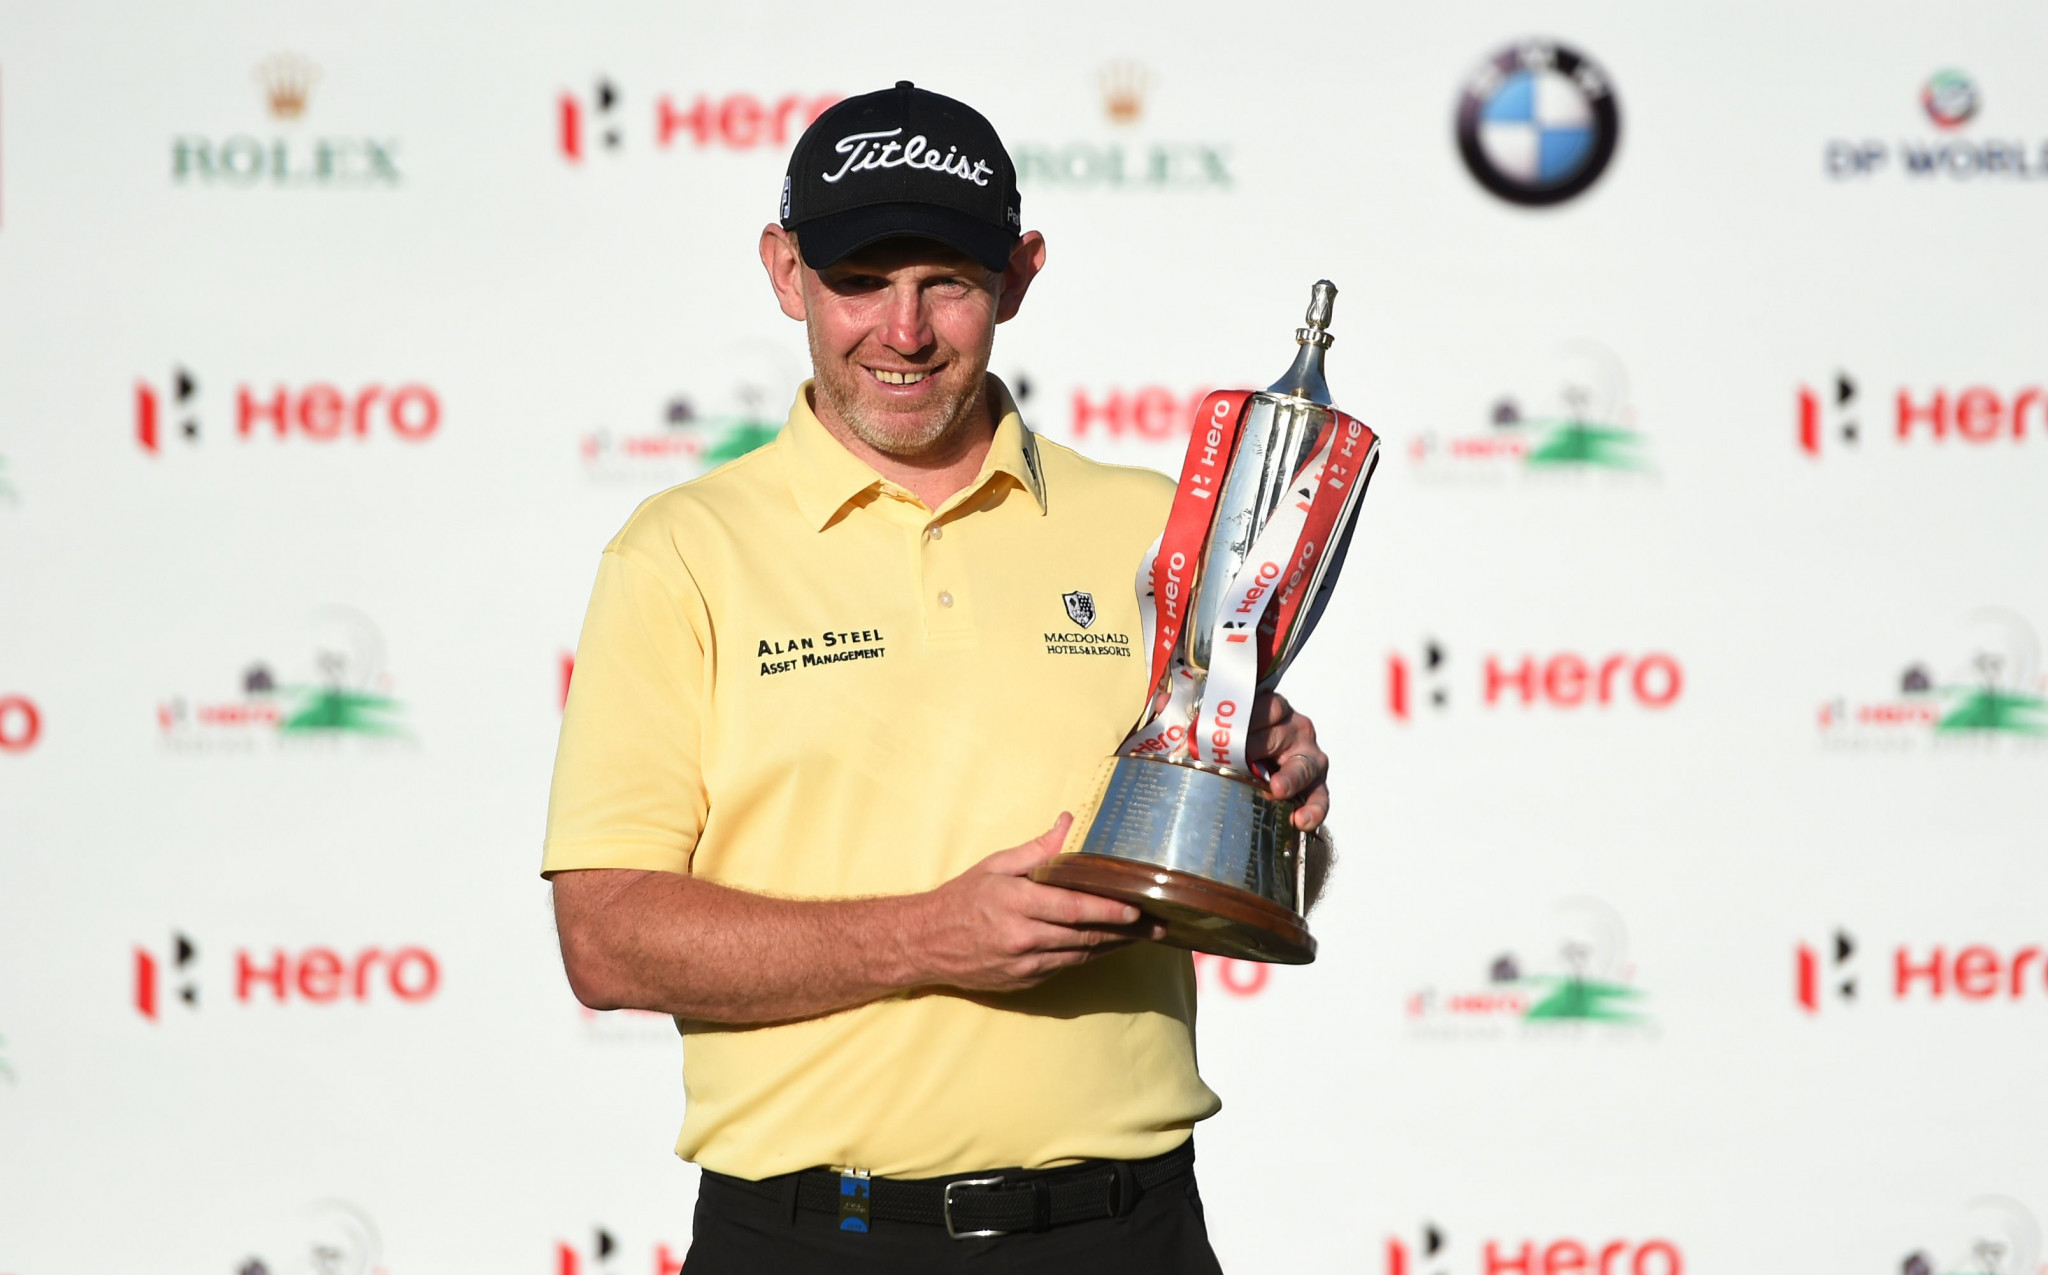 Stephen Gallacher was the last winner of the Indian Open in 2019 ©Getty Images